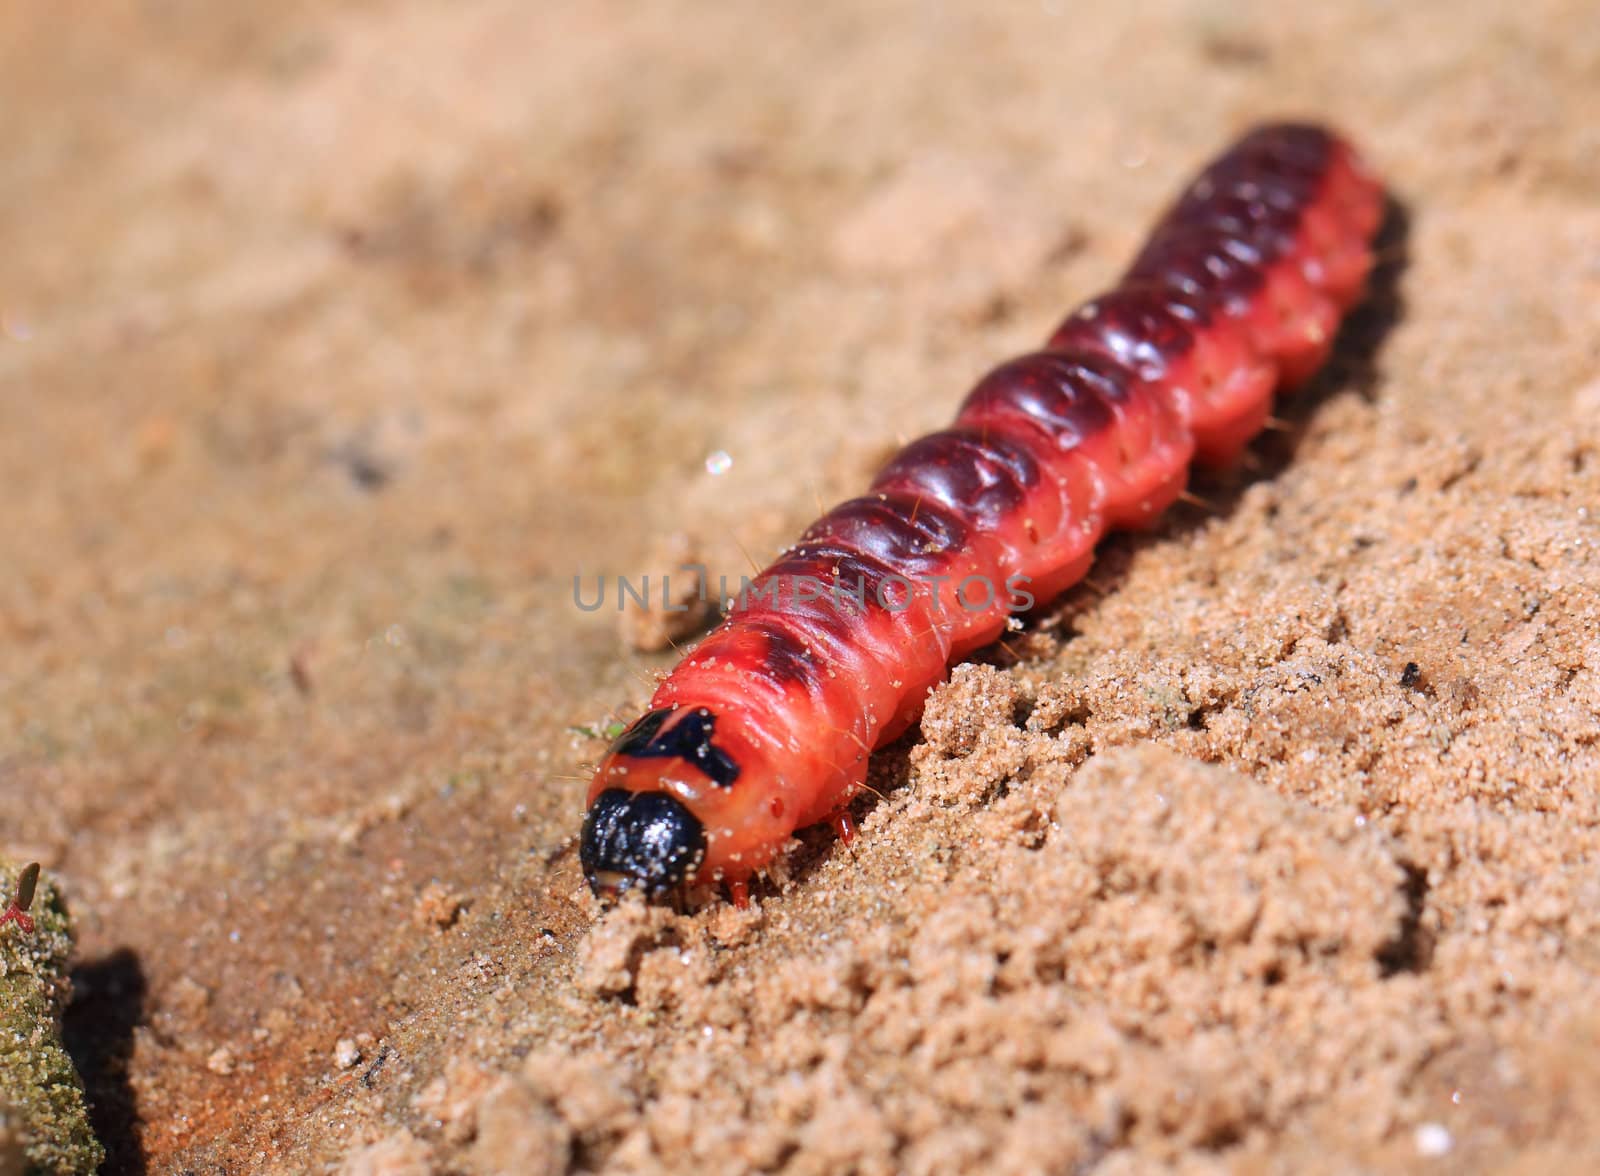 red caterpillar on dry sand by basel101658